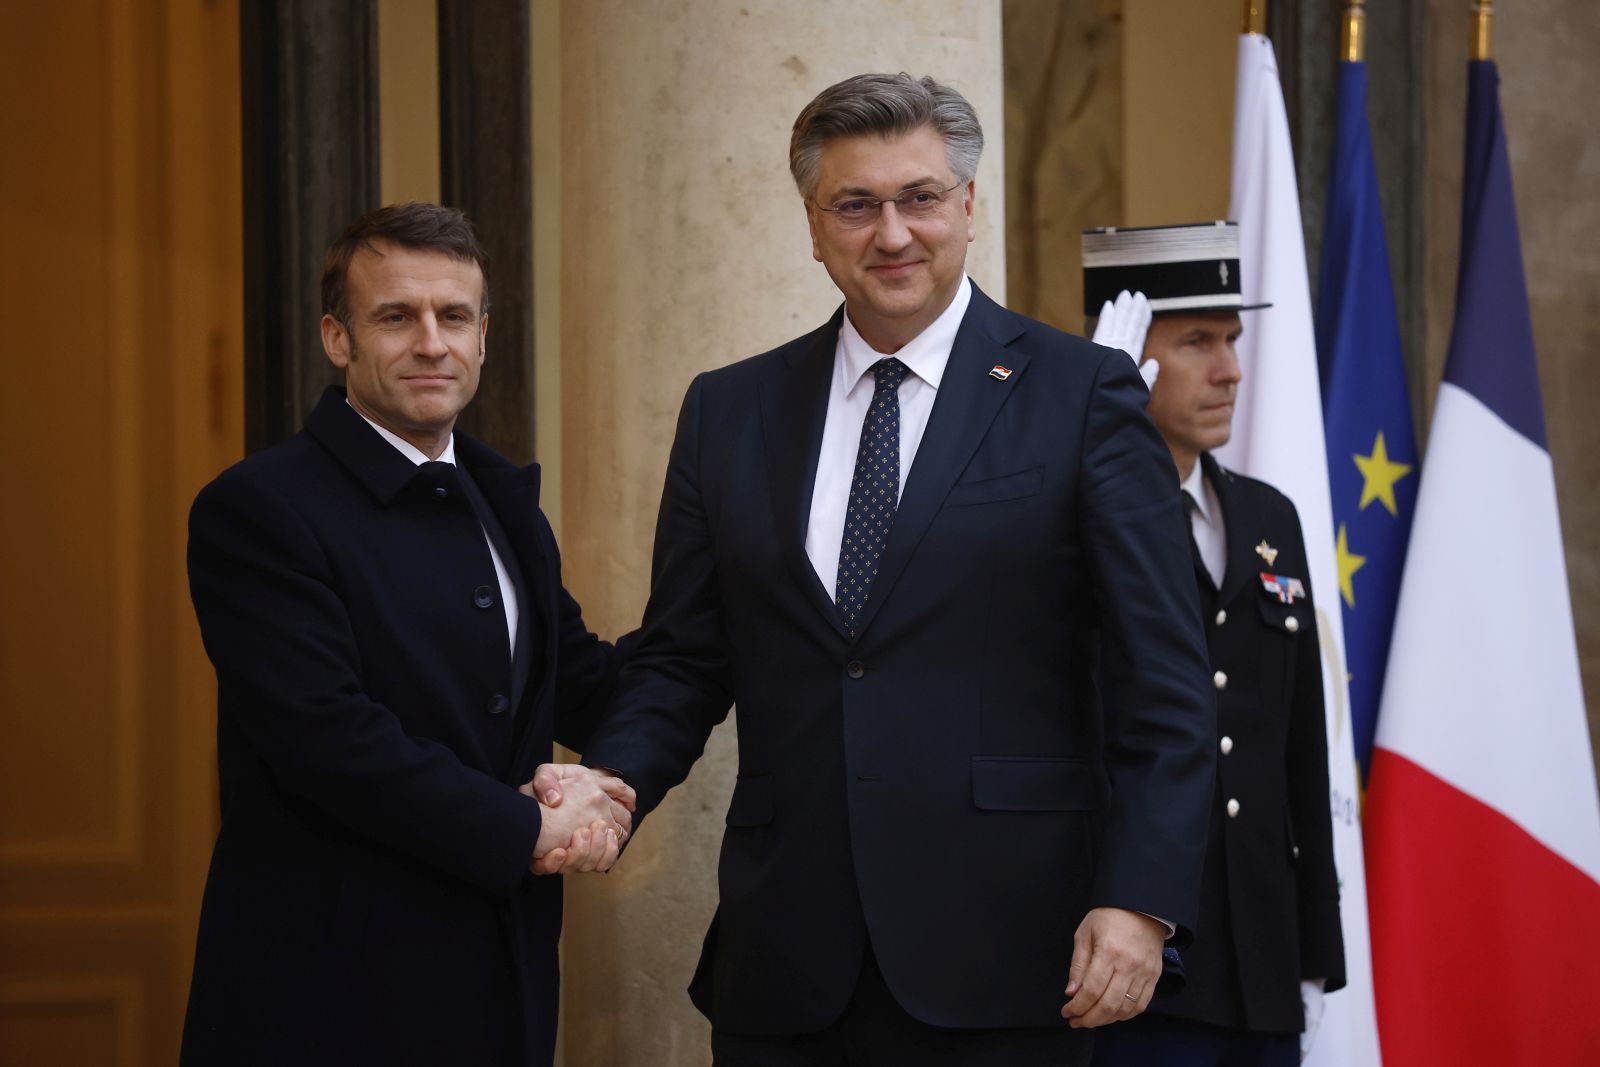 epa11183173 French President Emmanuel Macron (L) greets Croatian Prime Minister Andrej Plenkovic (C) upon his arrival at the Elysee Palace to attend the international conference in support of Ukraine in Paris, France, 26 February 2024.  EPA/YOAN VALAT